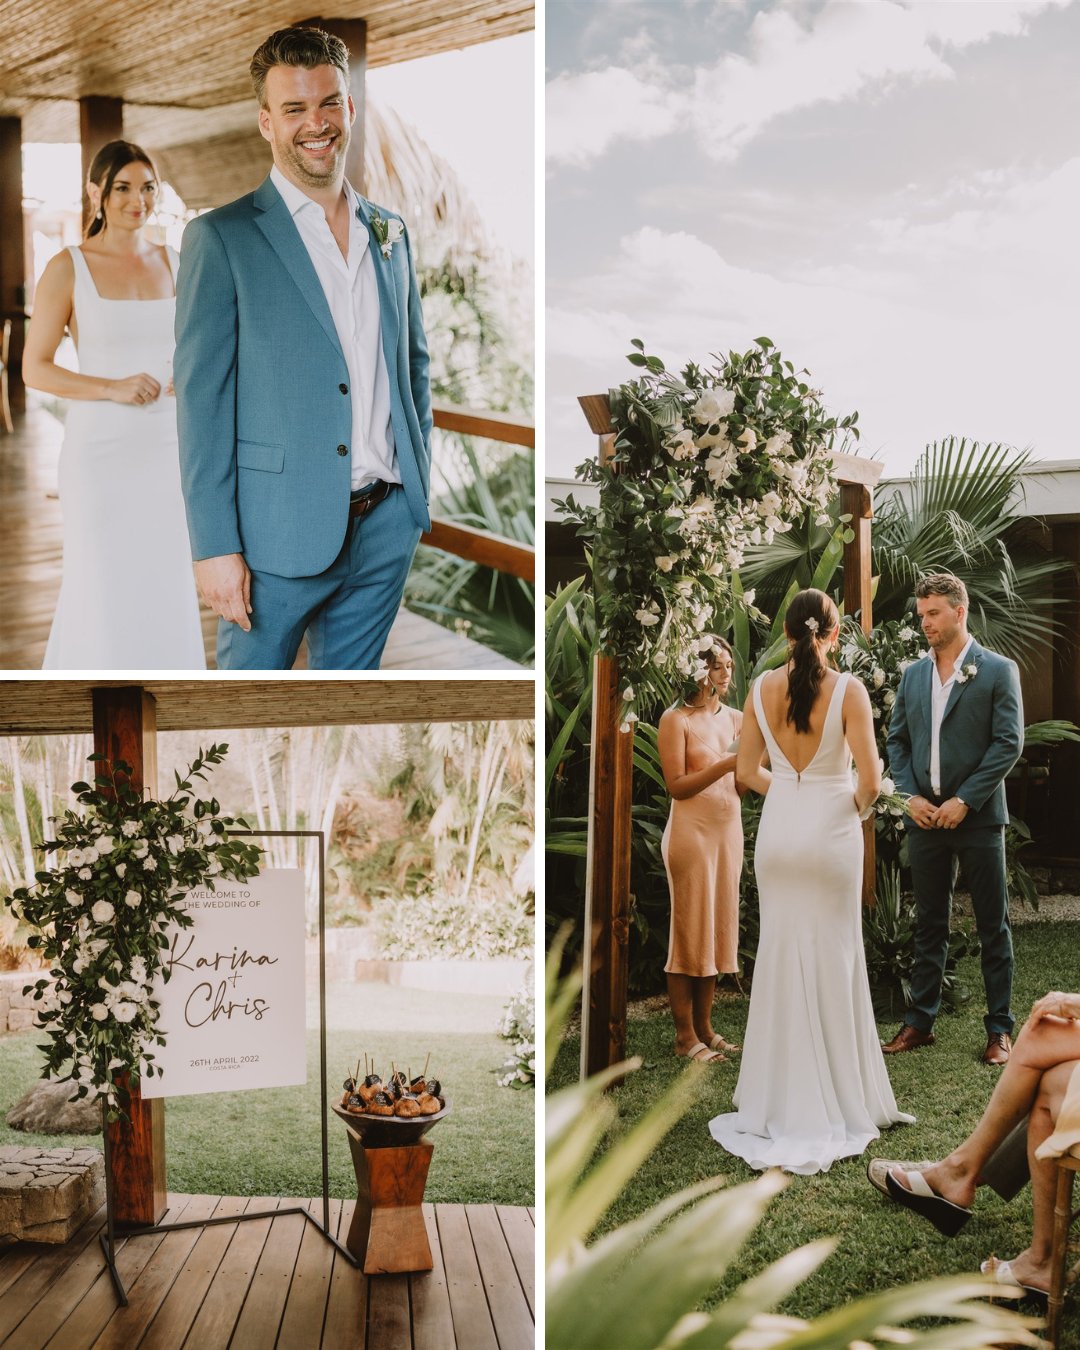 groom smiles at camera as bride walks up behind him for the first look; welcome sign with Karin and Chris on it; bride and groom stand at altar adorned with white florals and greenery